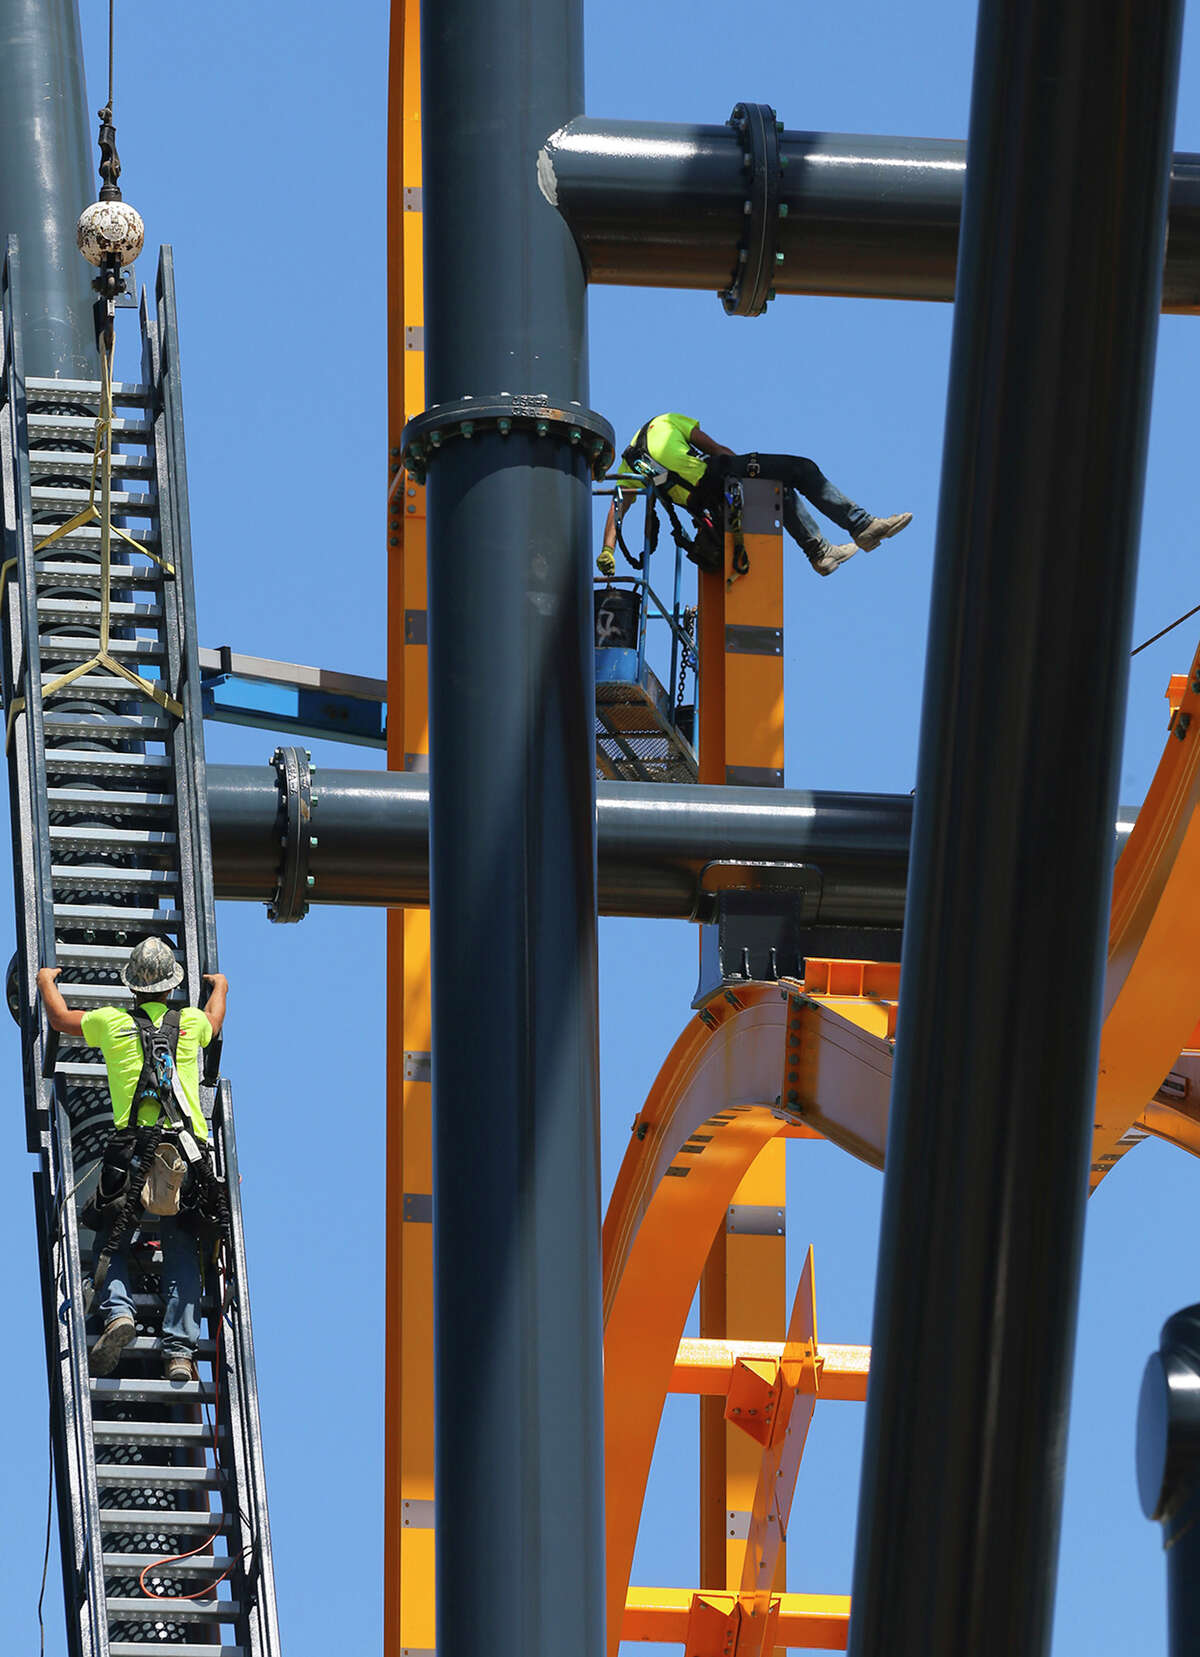 A piece of stairwell (left) is hoisted into place Wednesday March 25, 2015 on a new roller coaster ride at Six Flags Fiesta Texas. The roller coaster, called BATMAN: The Ride, is known as a 4D Wing coaster and lifts riders up 120 feet. Riders are flipped head-over-heels and will experience tumbling and unexpected drops along the way. The attraction is based on the Batman comic and offers immersion into the Batman storyline. The ride uses magnetic technology and has two beyond 90 degree drops giving the sensation of free-falling. The attraction has five vehicles with eight passengers each and will open in early summer 2015.